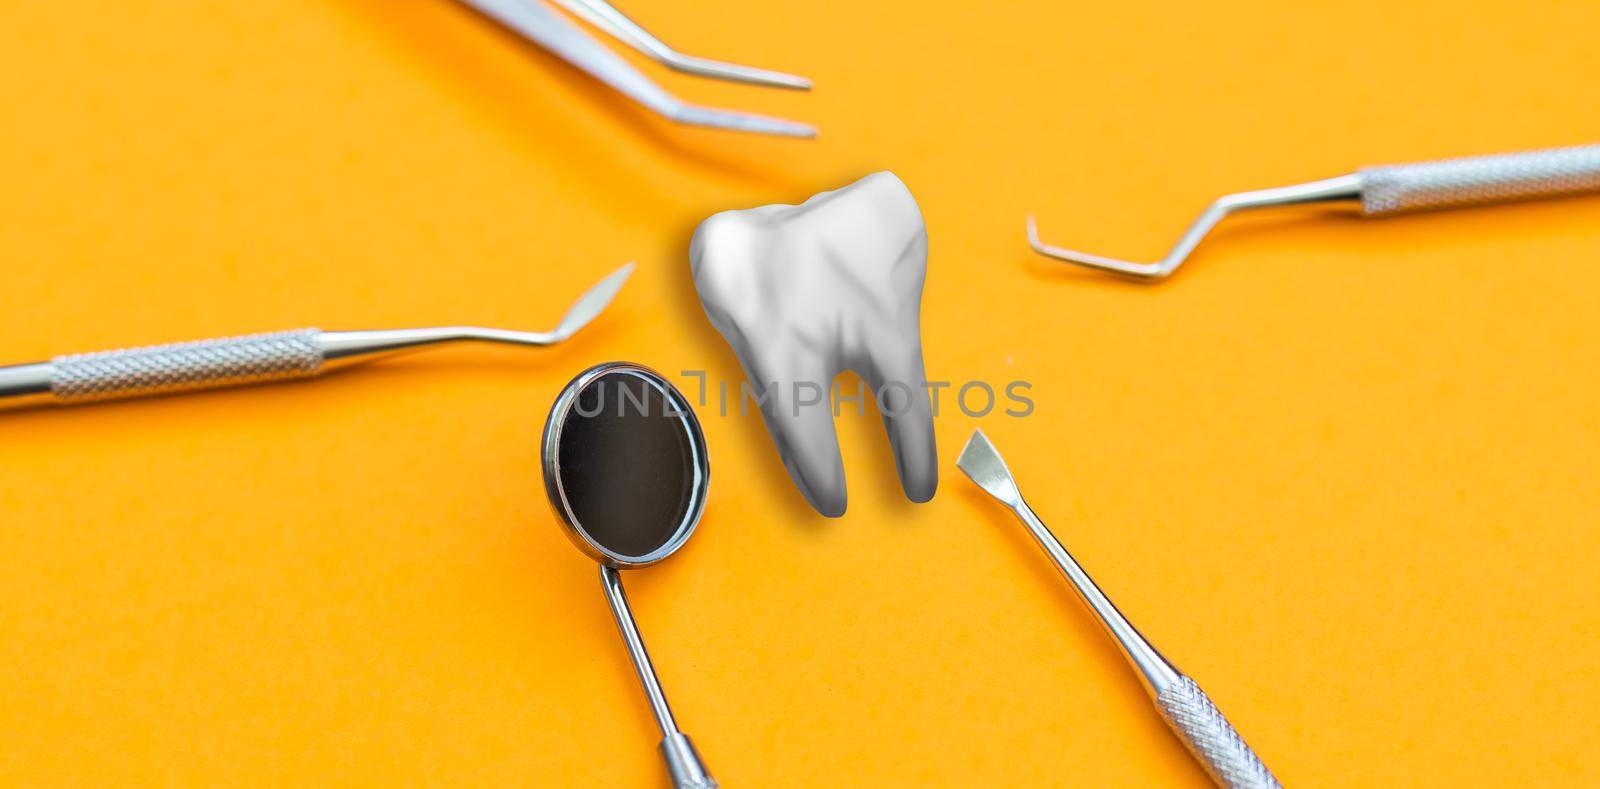 Artificial tooth and dental instrument on table. Dental services concept by Andelov13